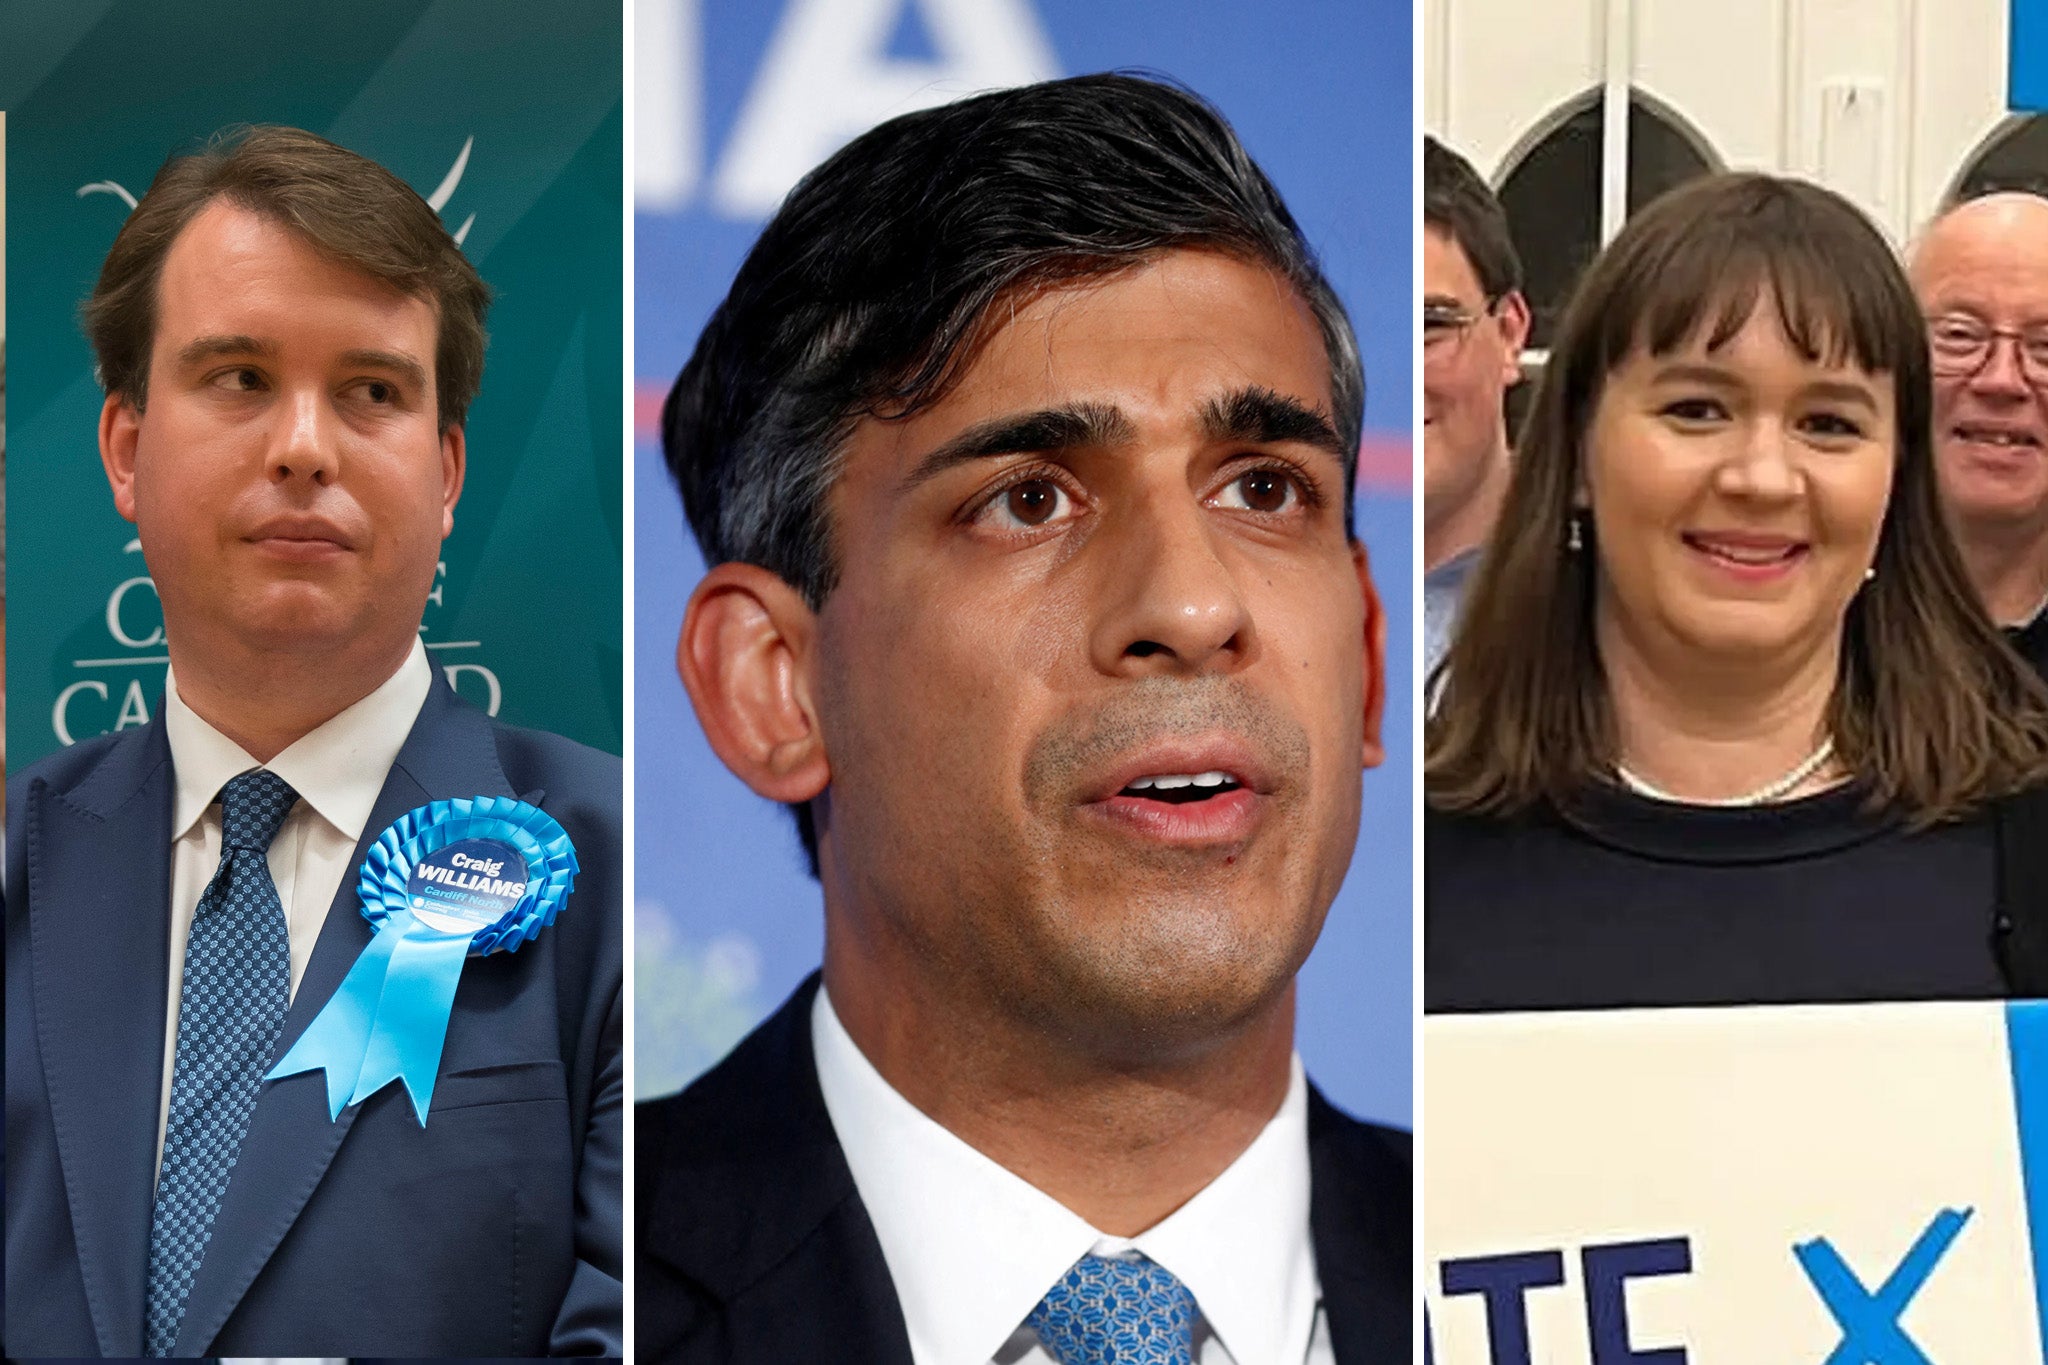 Rishi Sunak has withdrawn the Tory party’s support for Craig Williams, left, and Laura Saunders in the aftermath of the betting scandal